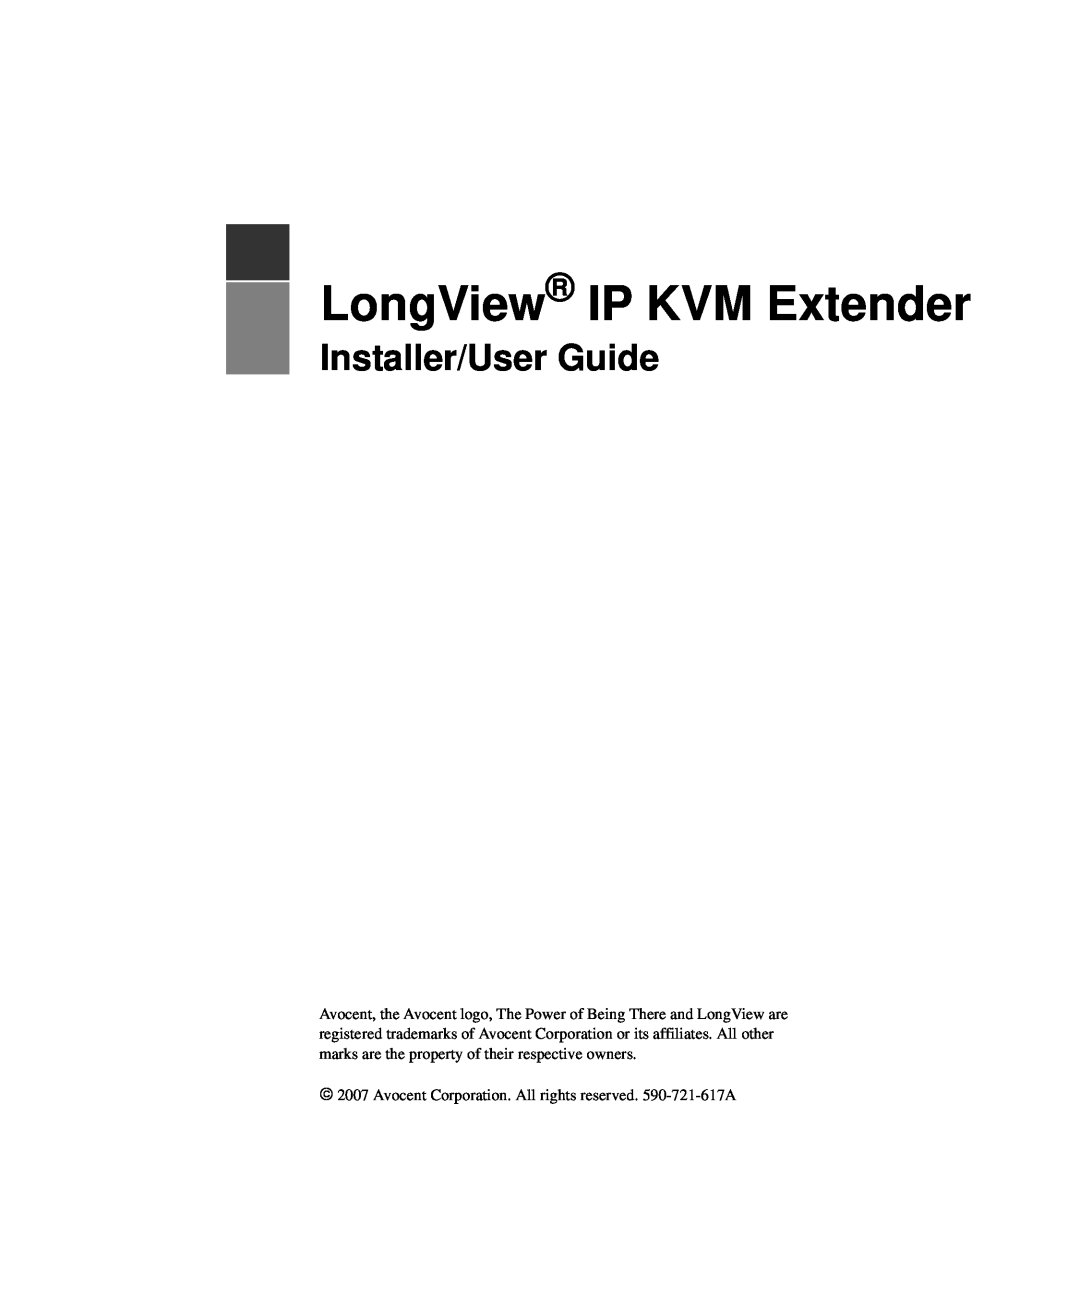 Avocent manual LongView IP KVM Extender, Installer/User Guide, Avocent Corporation. All rights reserved. 590-721-617A 